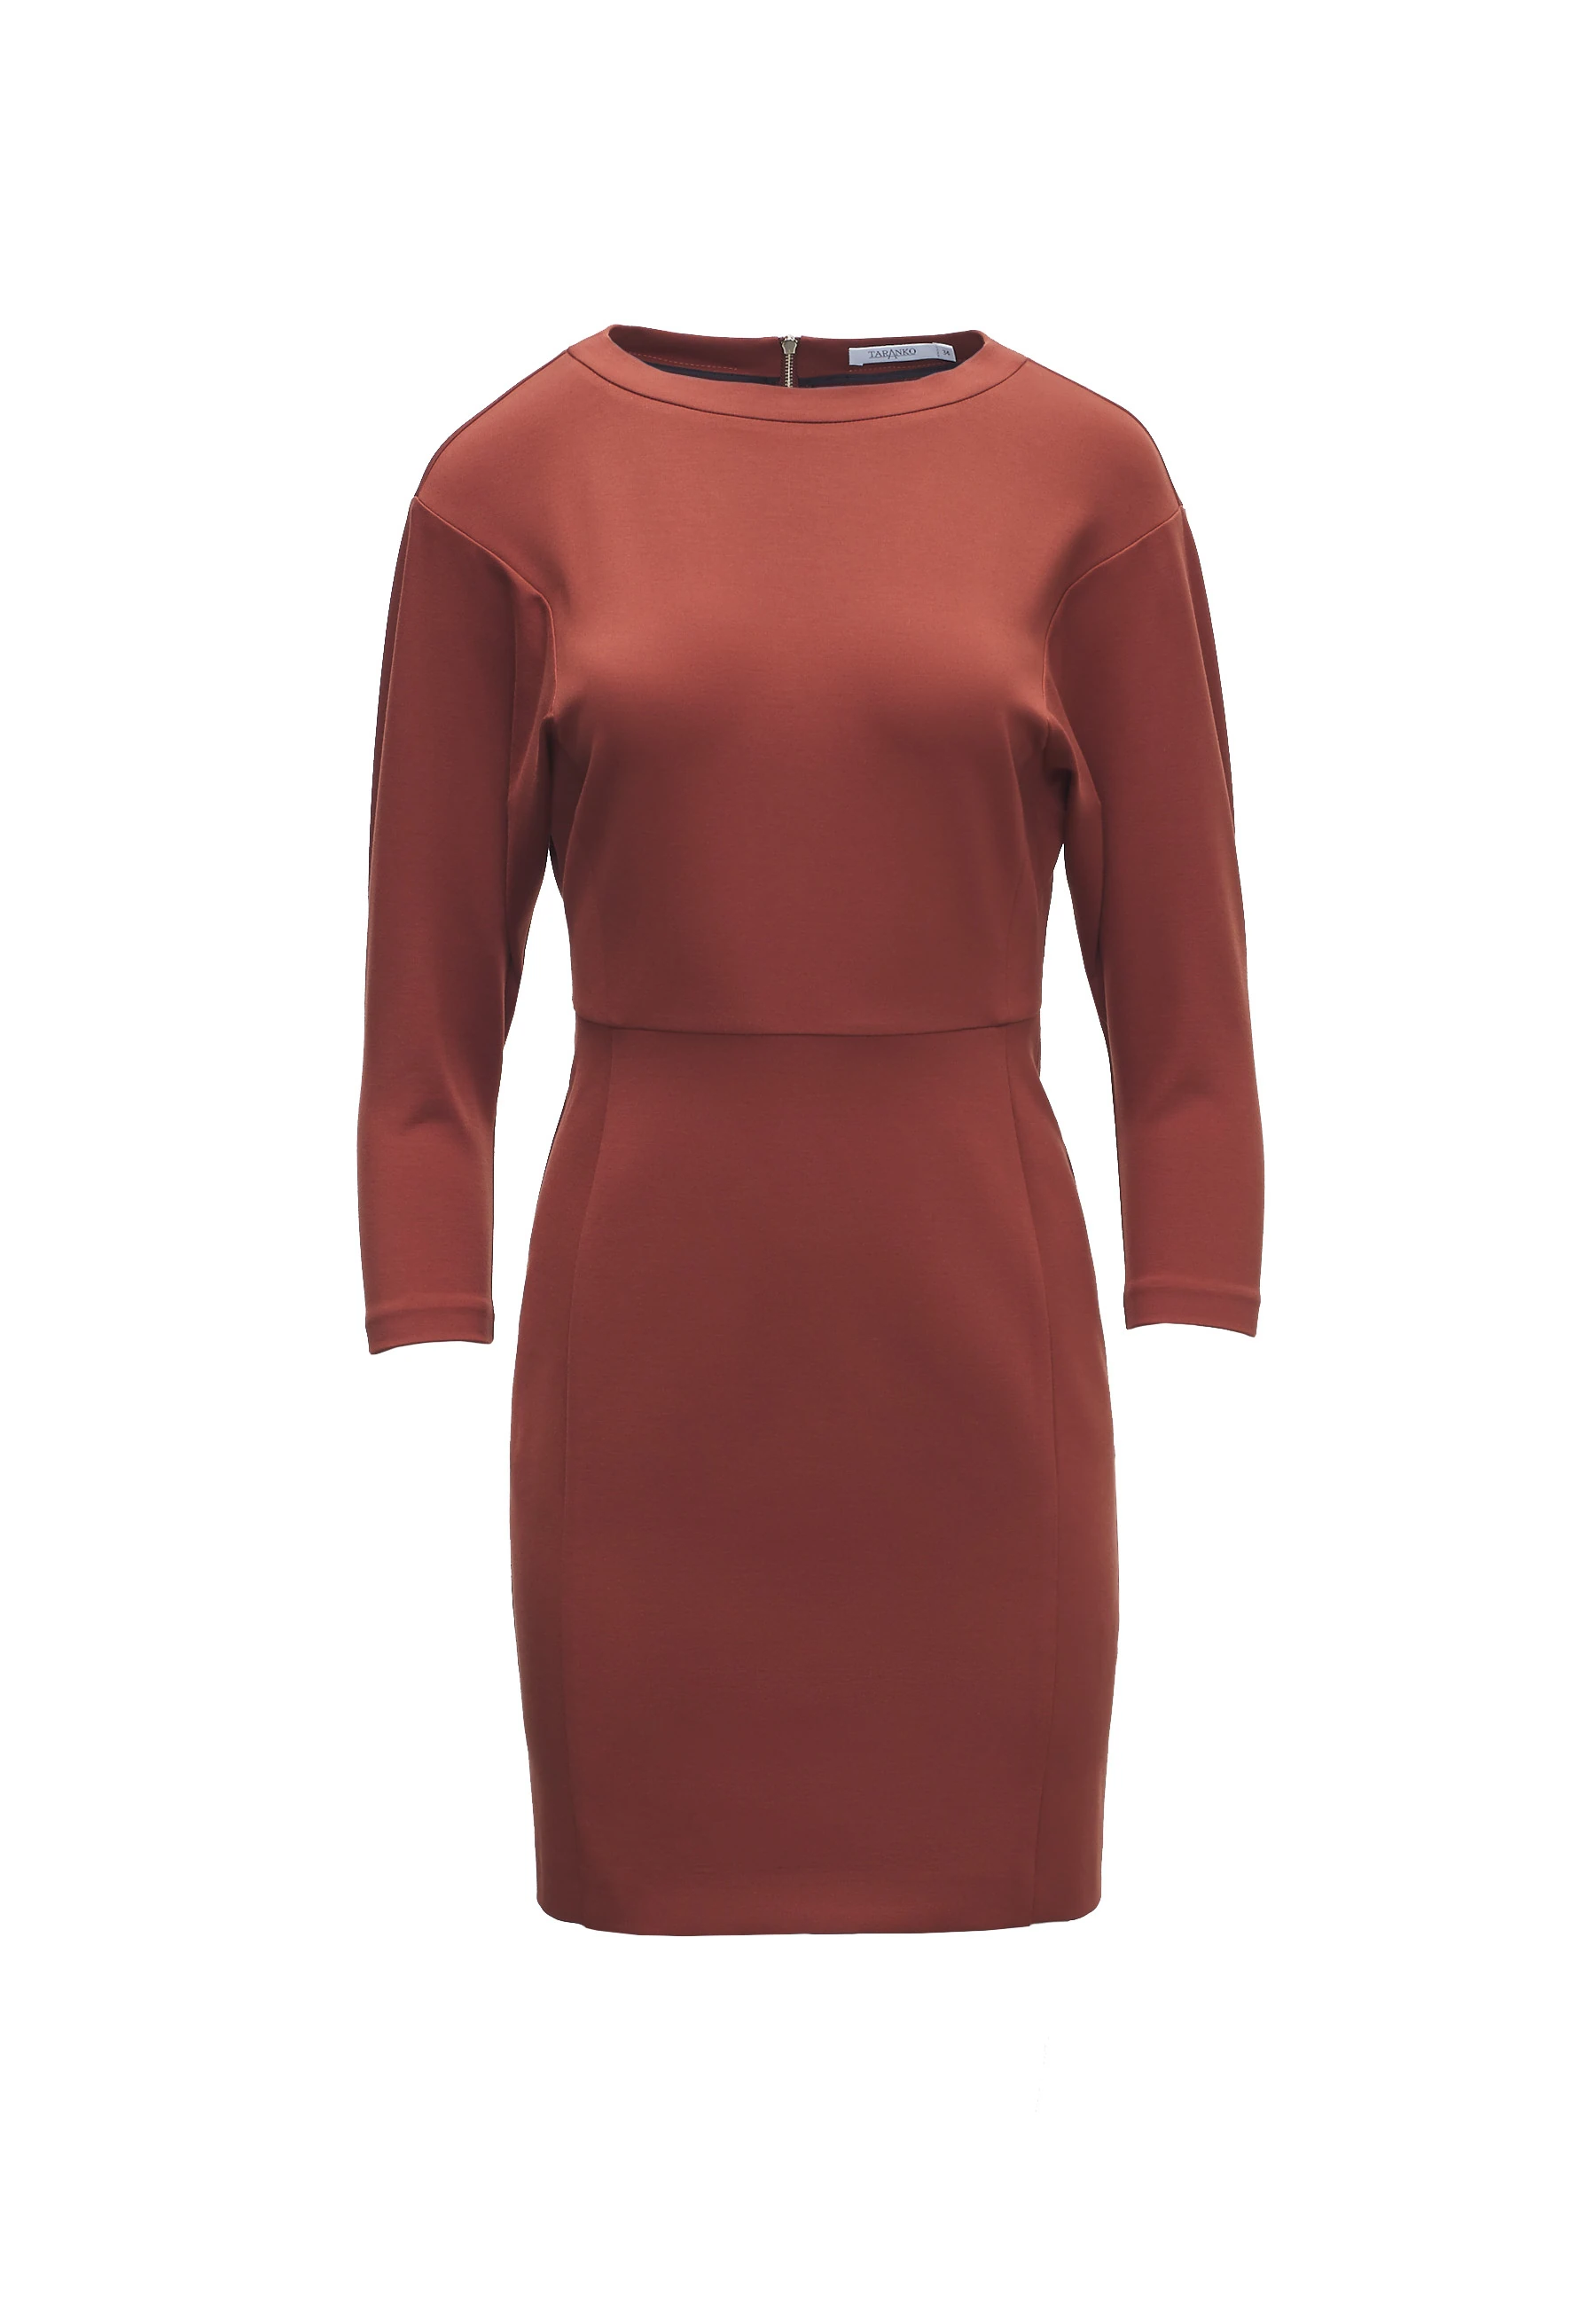 BROWN DRESS WITH 3/4 SLEEVES